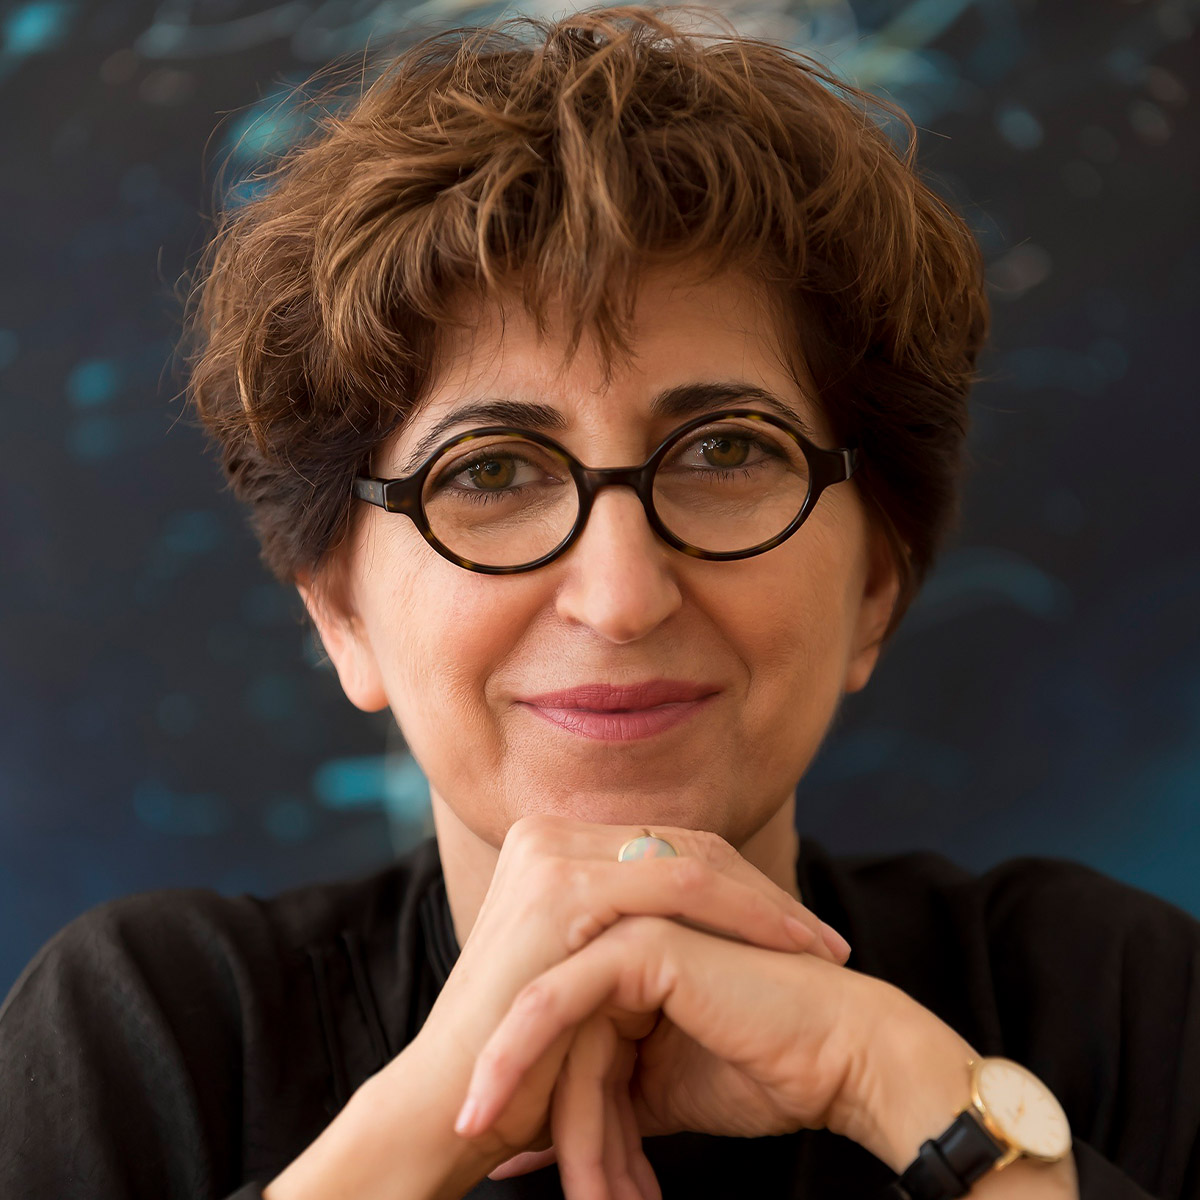 Fariba Bogzaran color portrait. Fariba is posed with both hands resting on each other and on her chin. She has short brown hair, circular eye-glasses, and a dark-colored top.